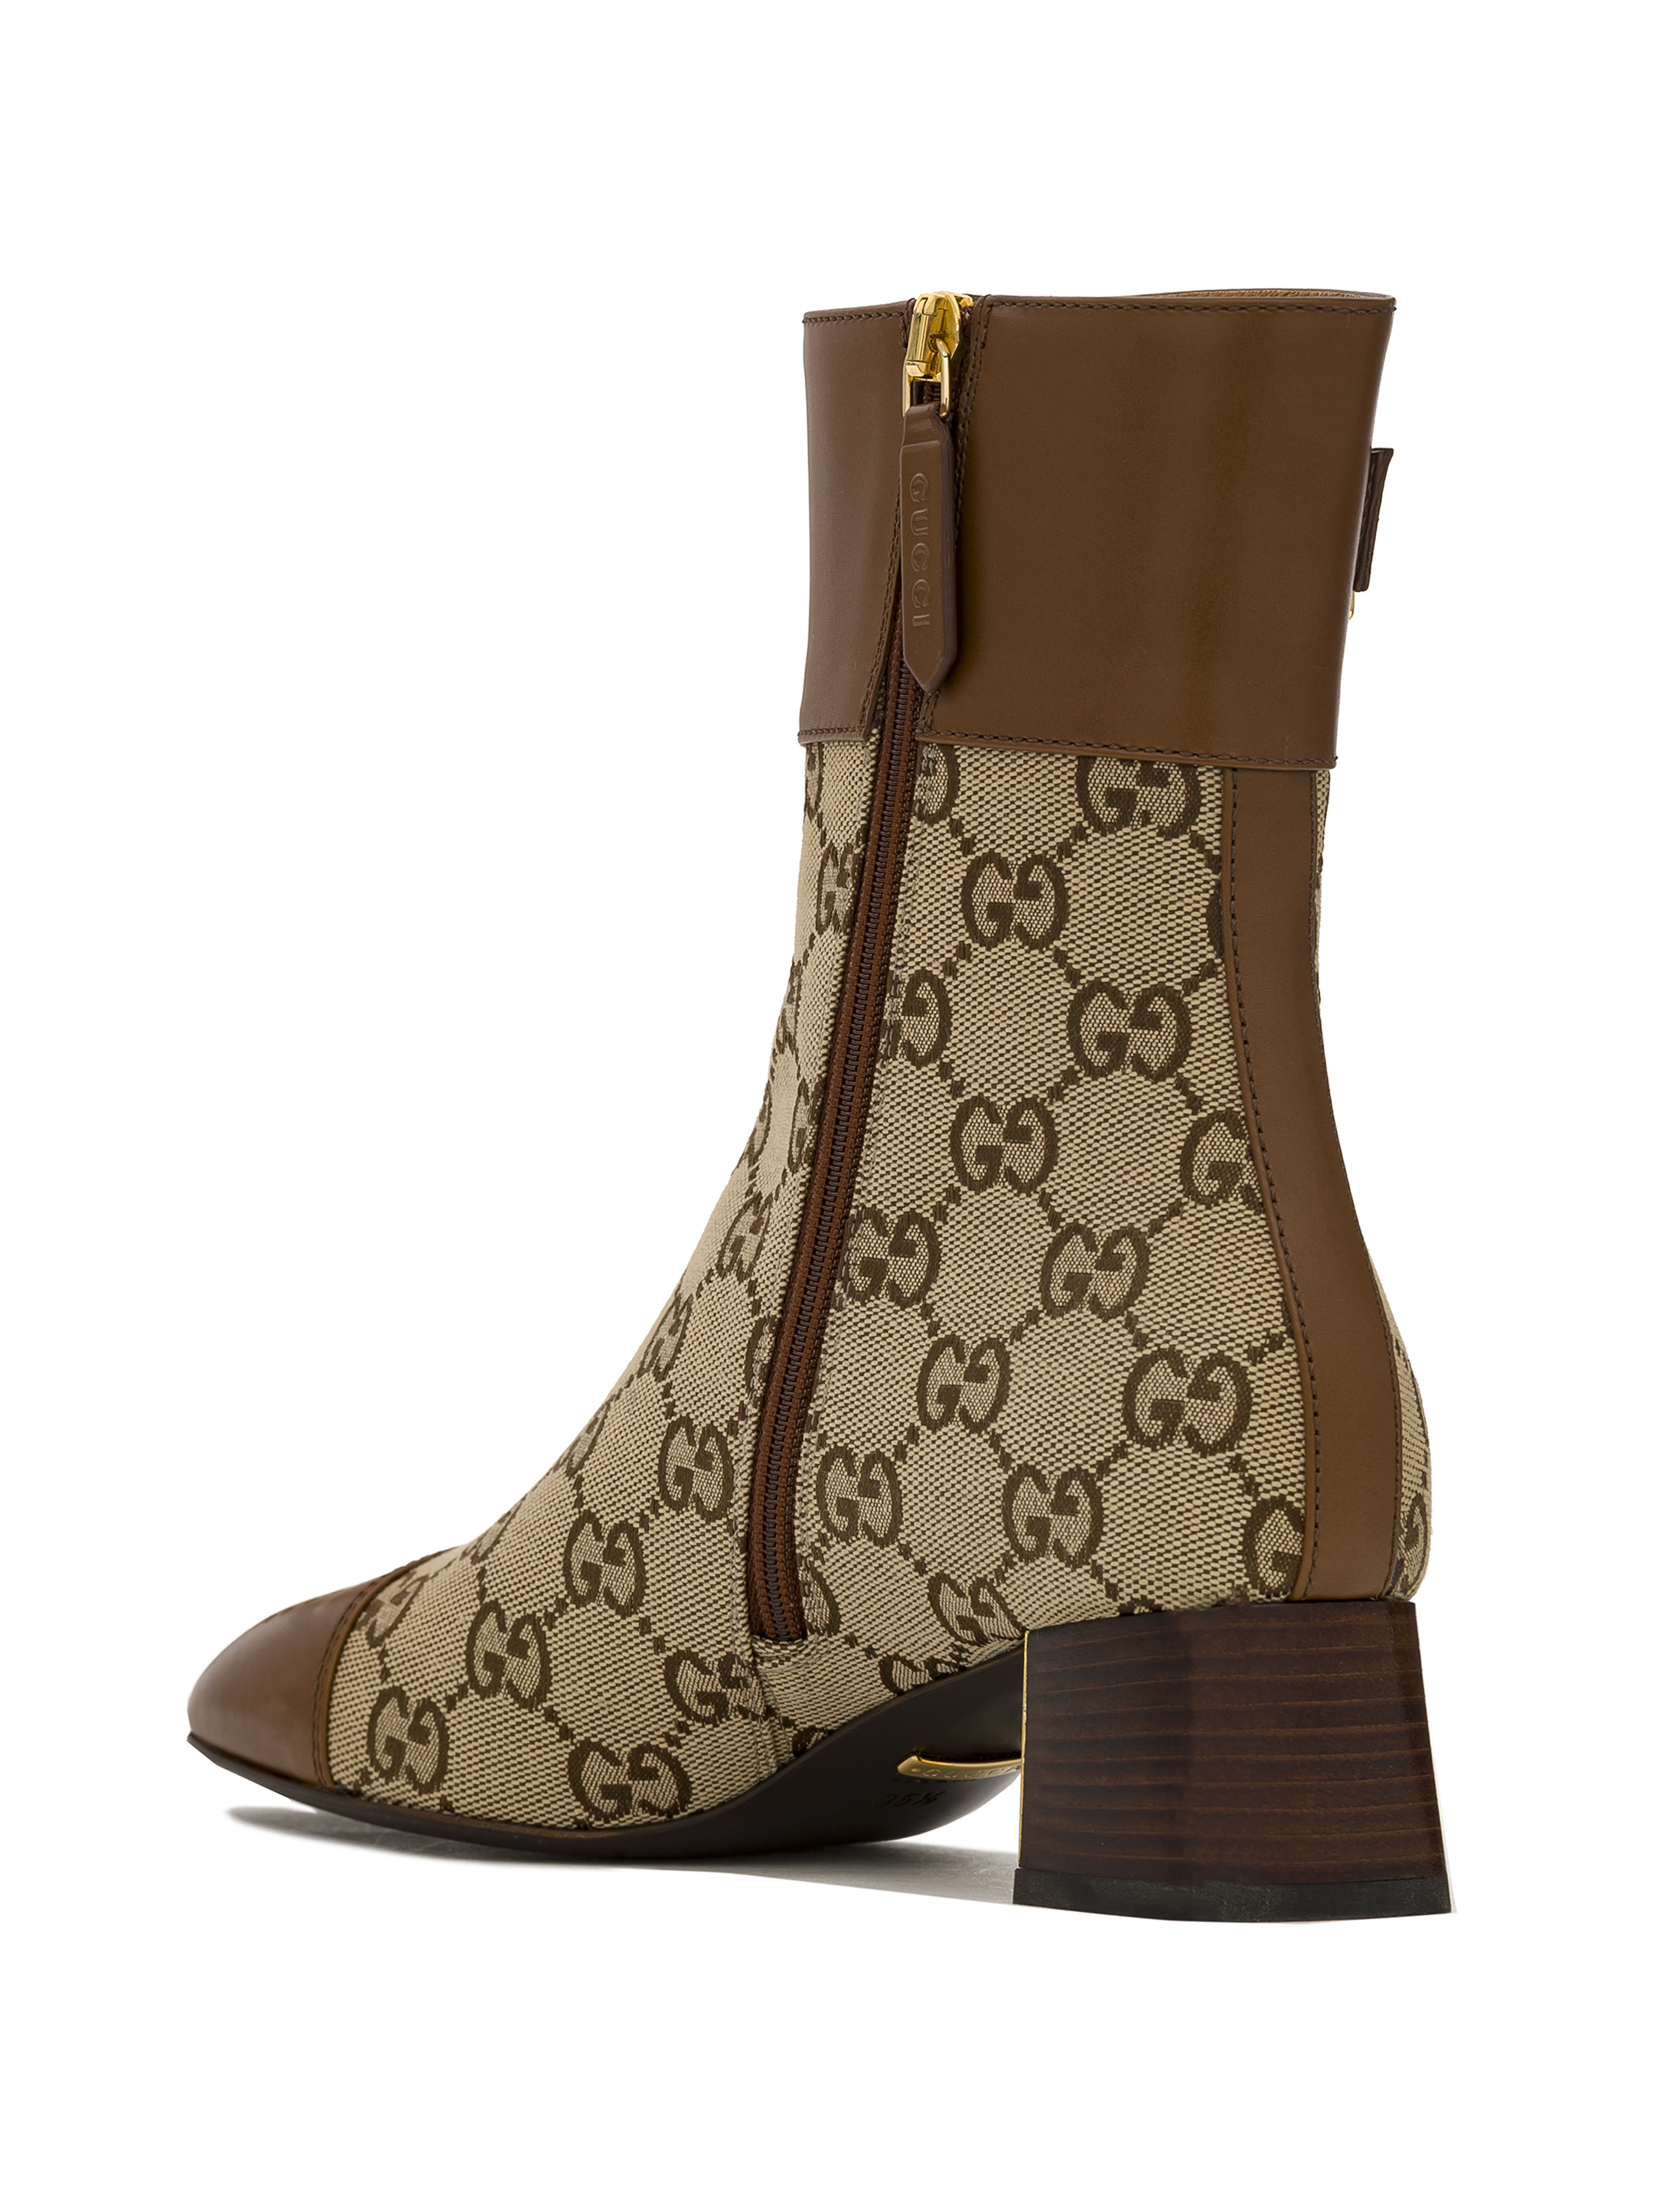 Gucci women's Ankle boots with GG monogram - buy for 624700 KZT in the  official Viled online store, art. 700023 